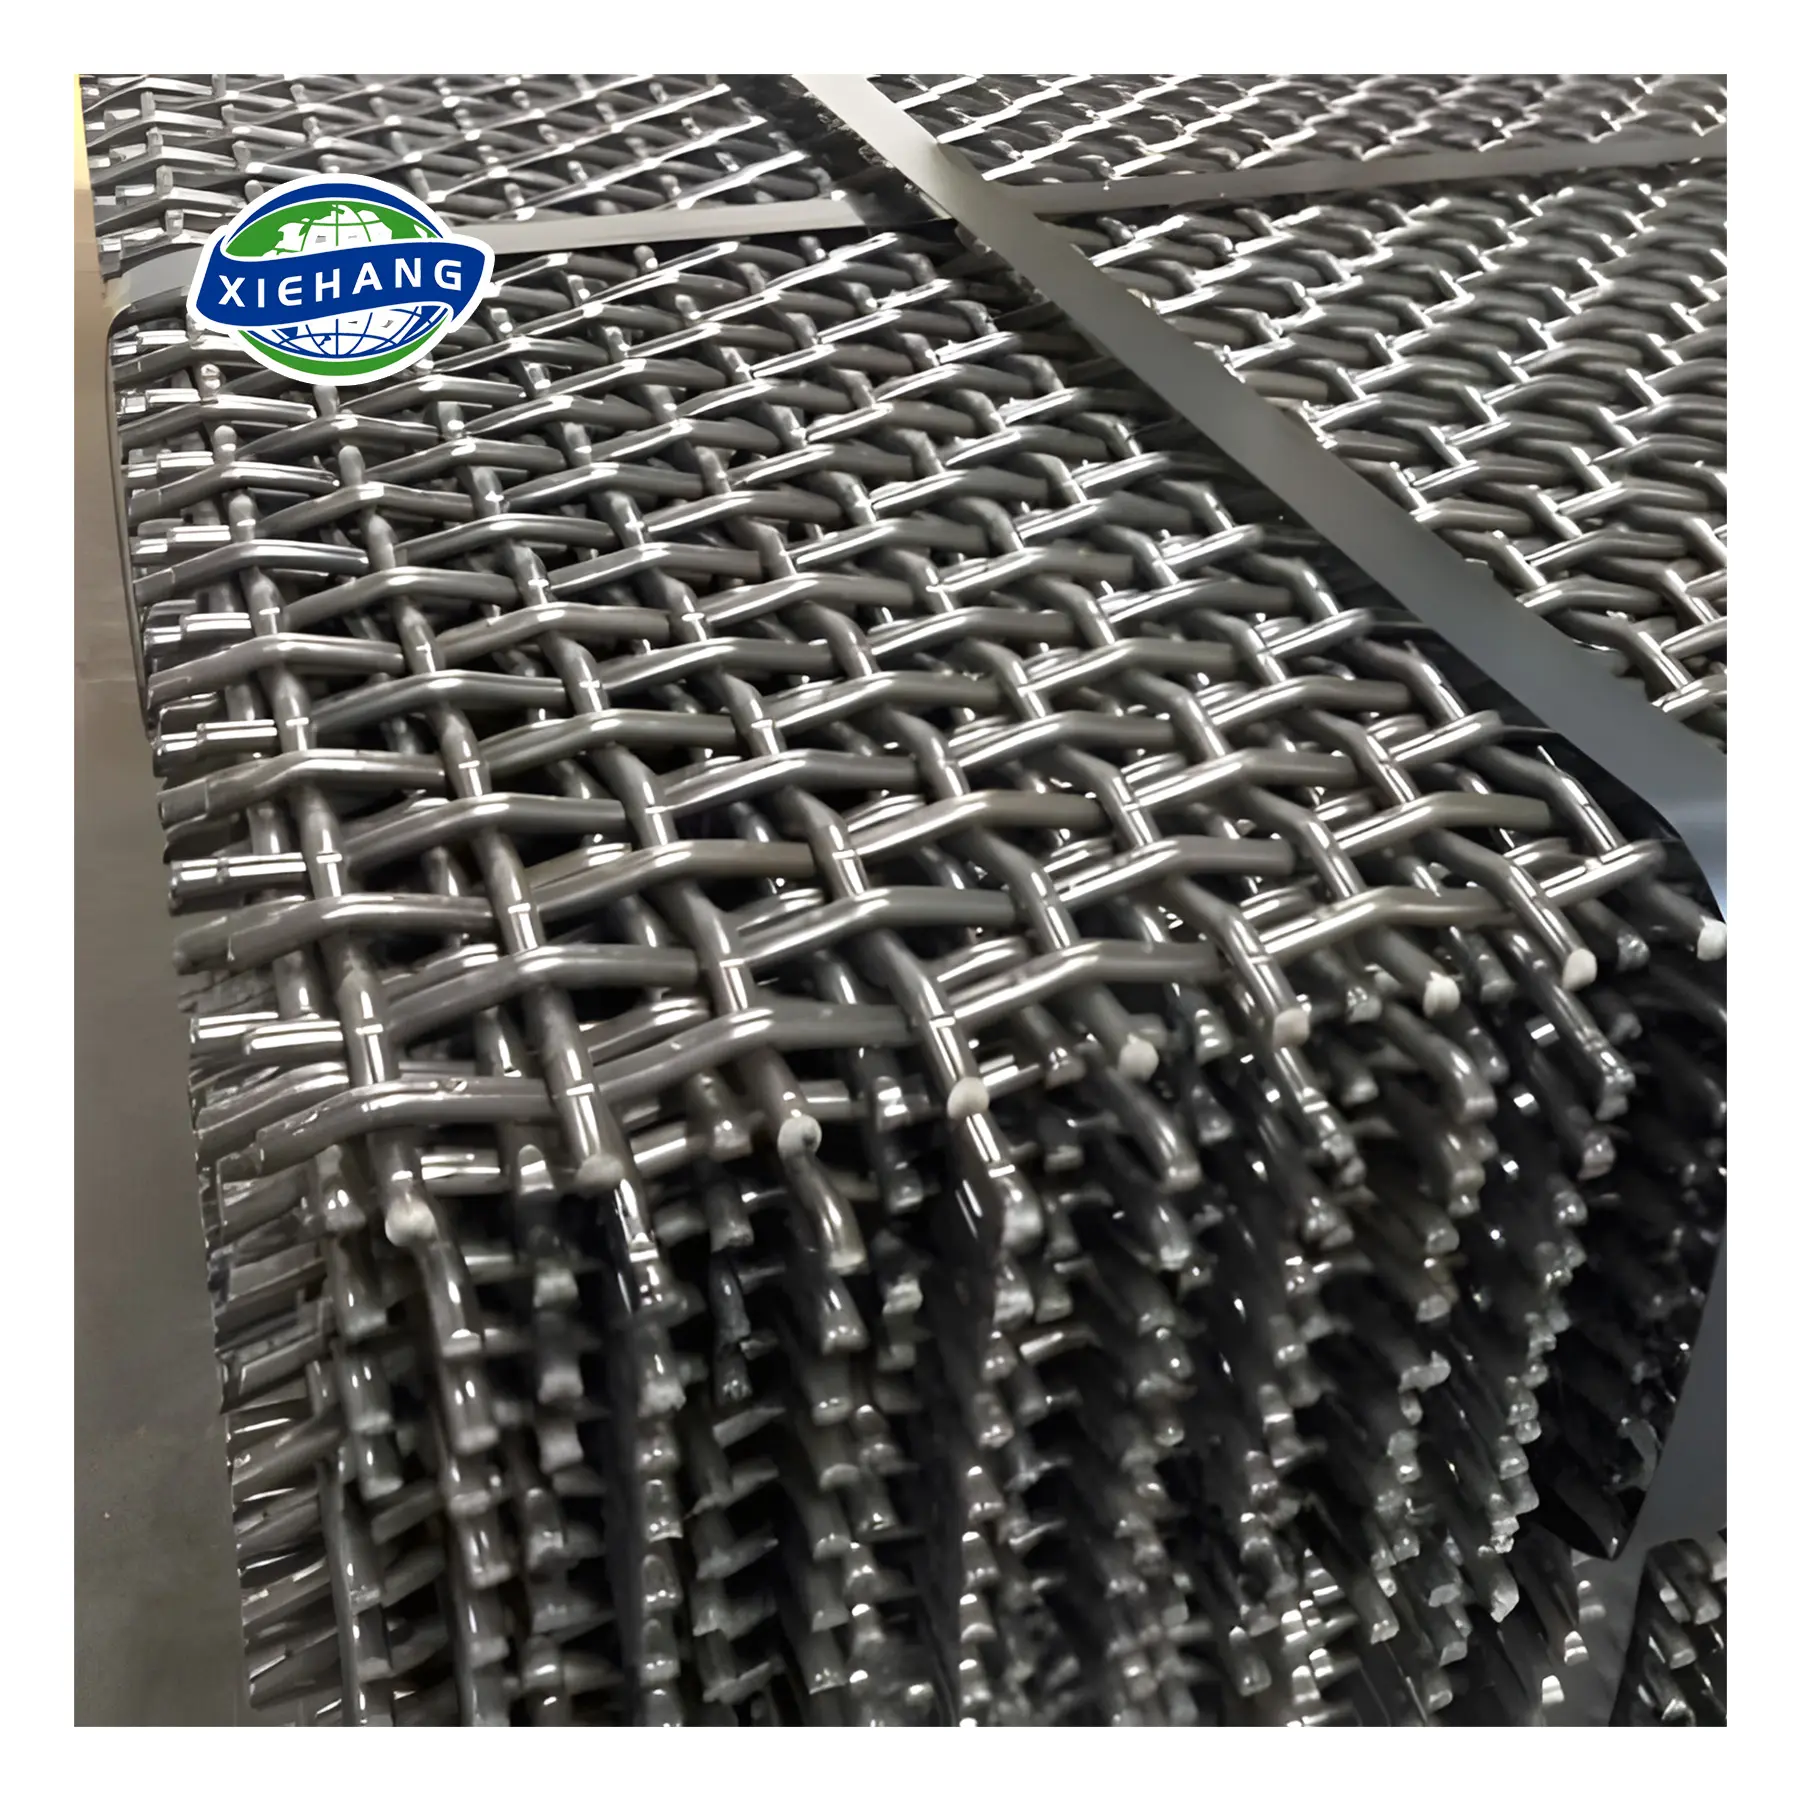 Crimped Wire Mesh Stainless Steel Iron Crimp Double 6 Mm Hole For Sale Lock Woven Light Screen 3.2mm Diameter Vibrating